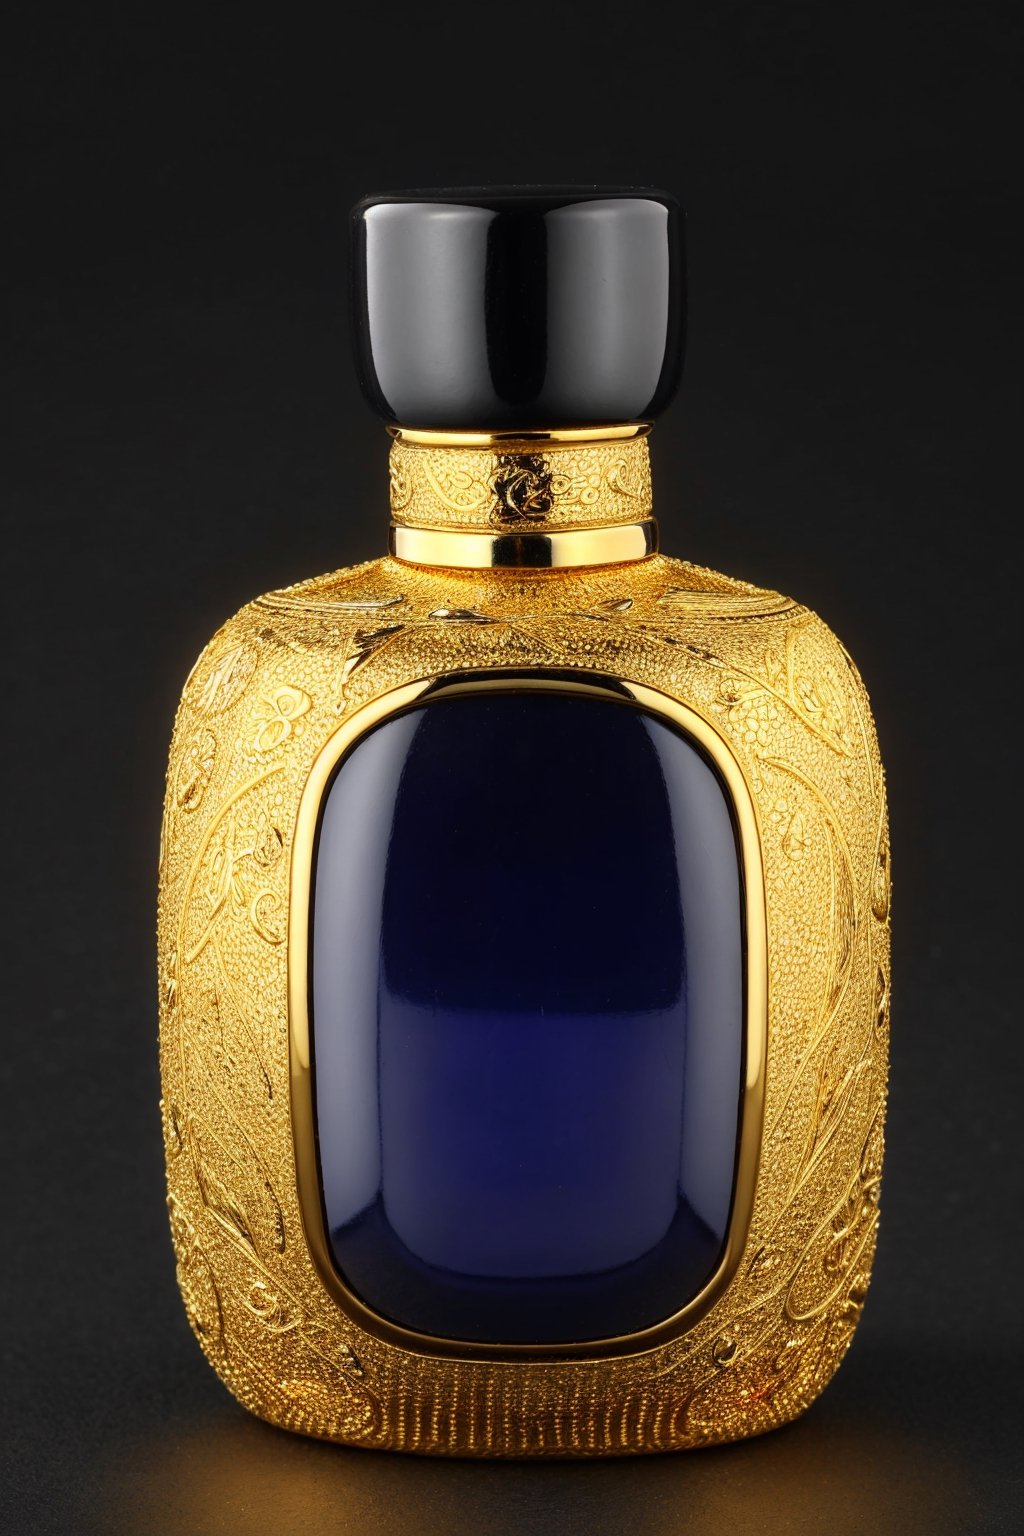 SD 1.5, beautiful perfume bottle,  Arabian style bottle, mysterious, ((extremely detailed)), Obsidian, very expensive design, golden design, extravagant 